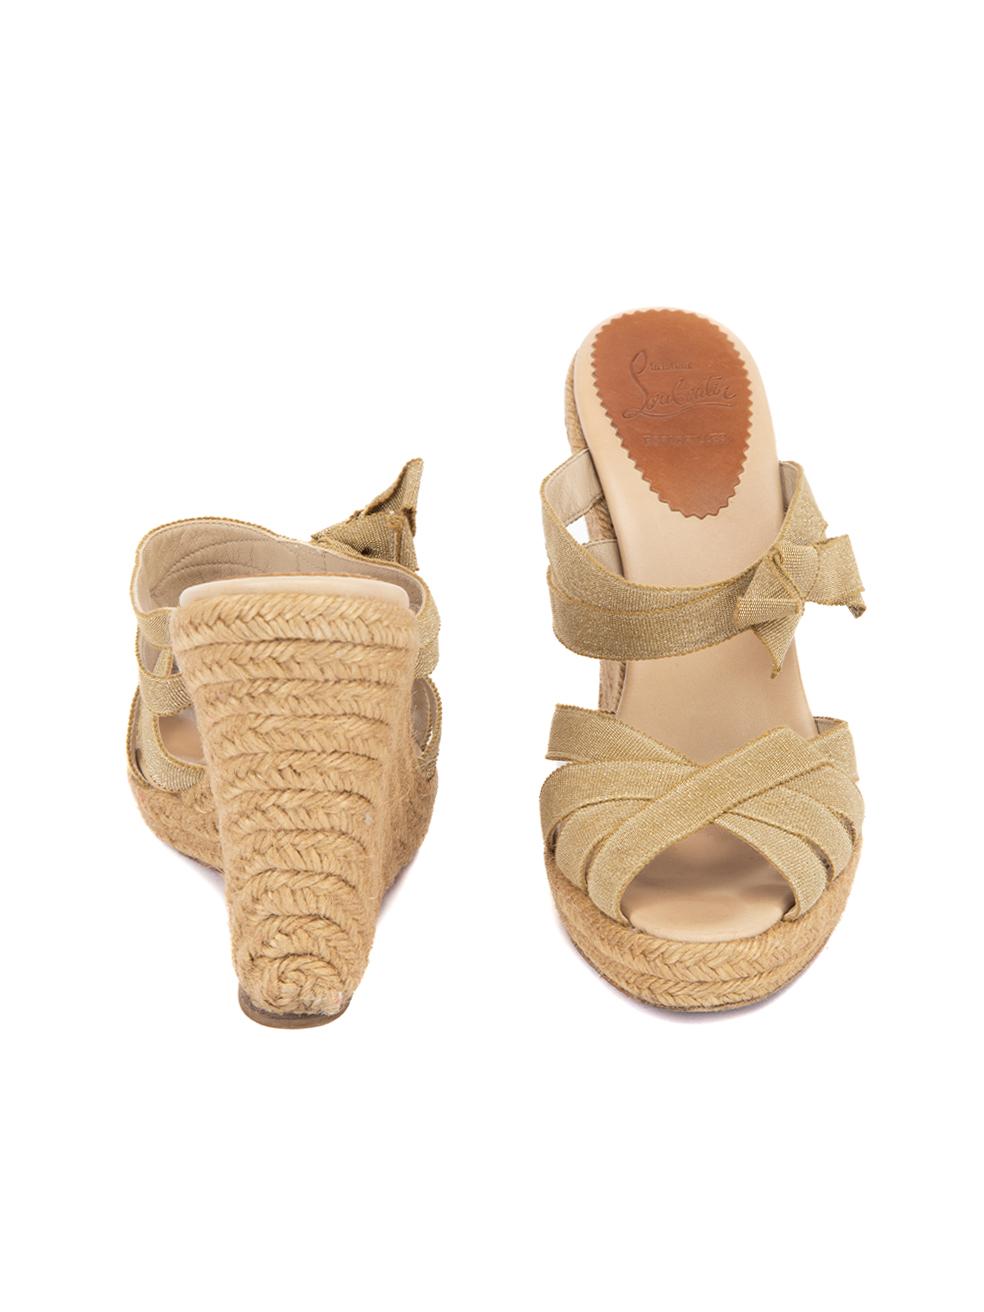 Christian Louboutin Women's Bronze Ribbon Espadrille Wedges In Good Condition In London, GB